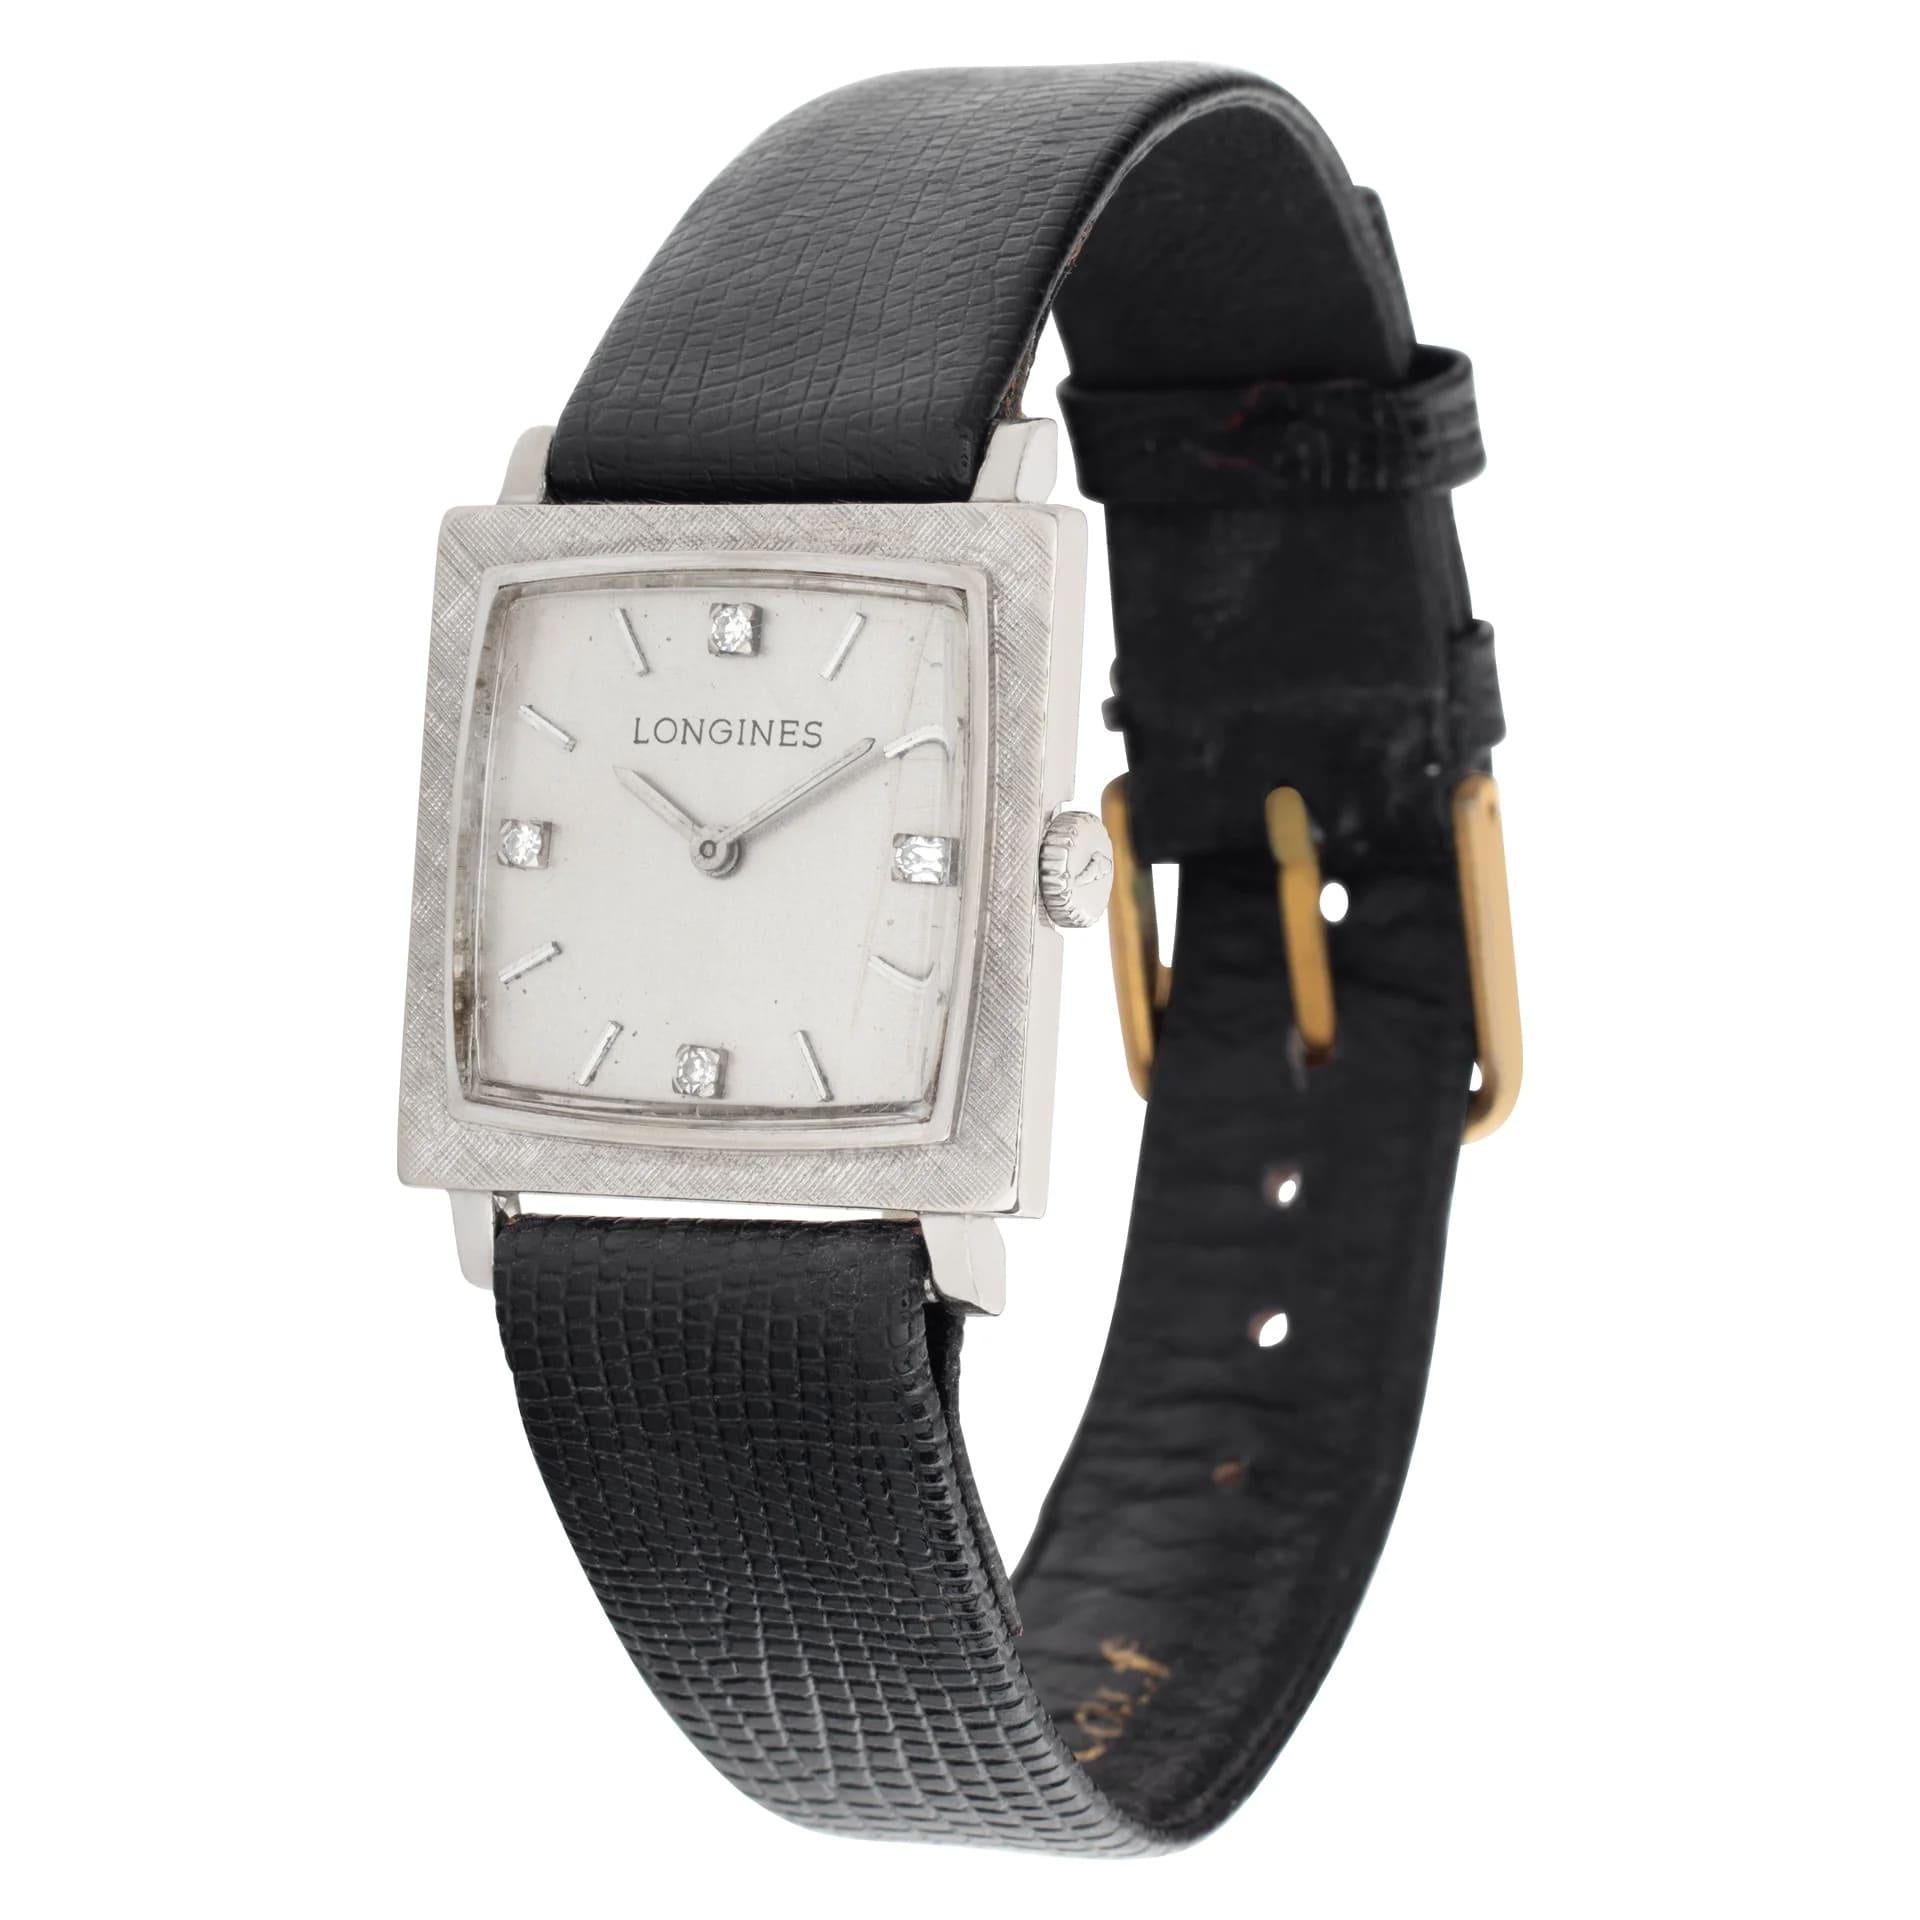 Vintage Longines Square Classic with diamond dial  in 14k white gold on black lizard band with stainless steel tang buckle. Manual. Circa 1960s. Fine Pre-owned Longines Watch. Certified preowned Vintage Longines Classic 206 watch is made out of